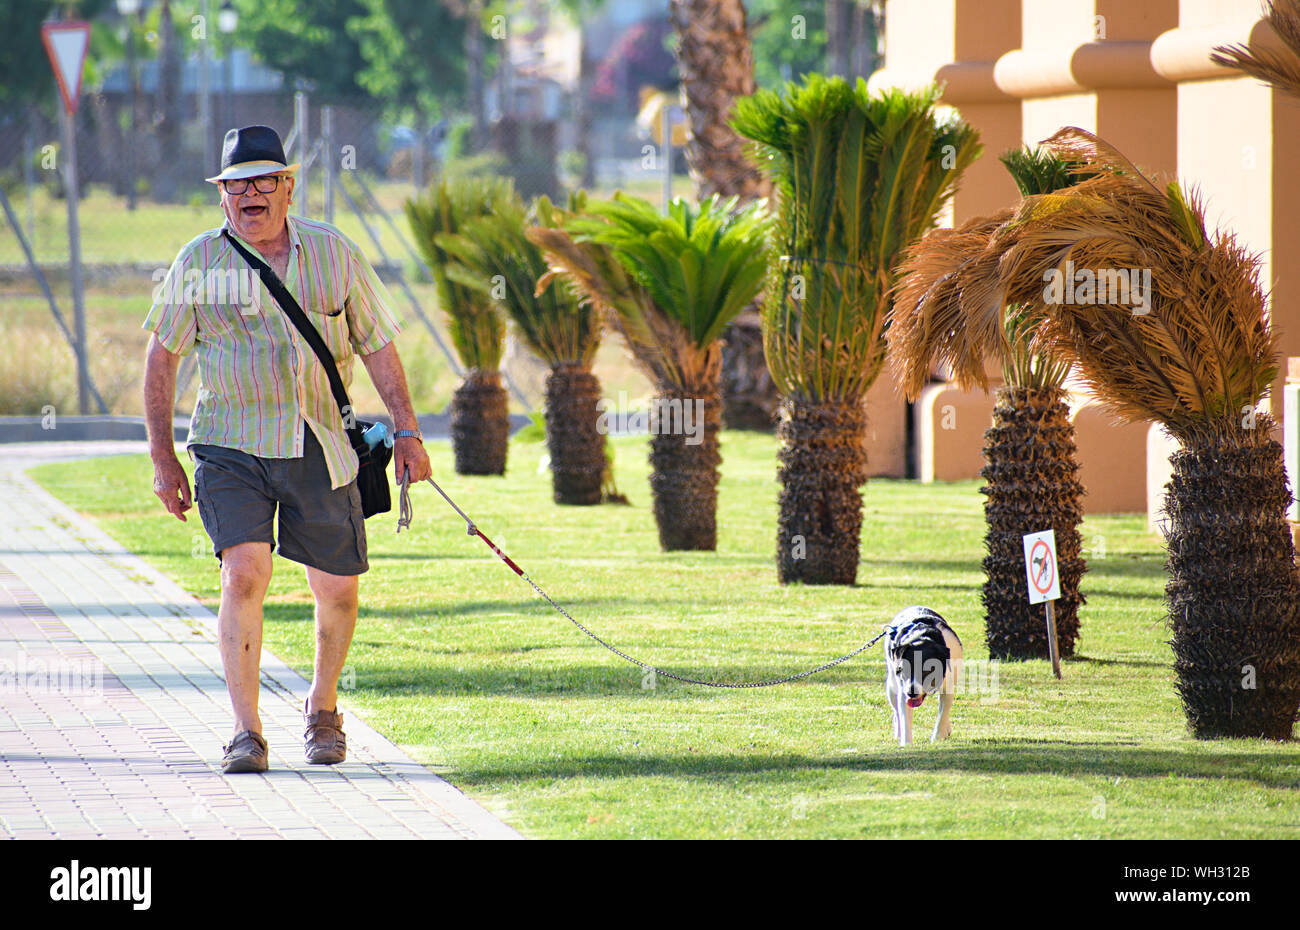 Murcia, Spain, July 17, 2019: An old, senior, retired man walks his dog at the street on a forbidden or restricted area with a 'no dogs' sign. Seniors. Stock Photo